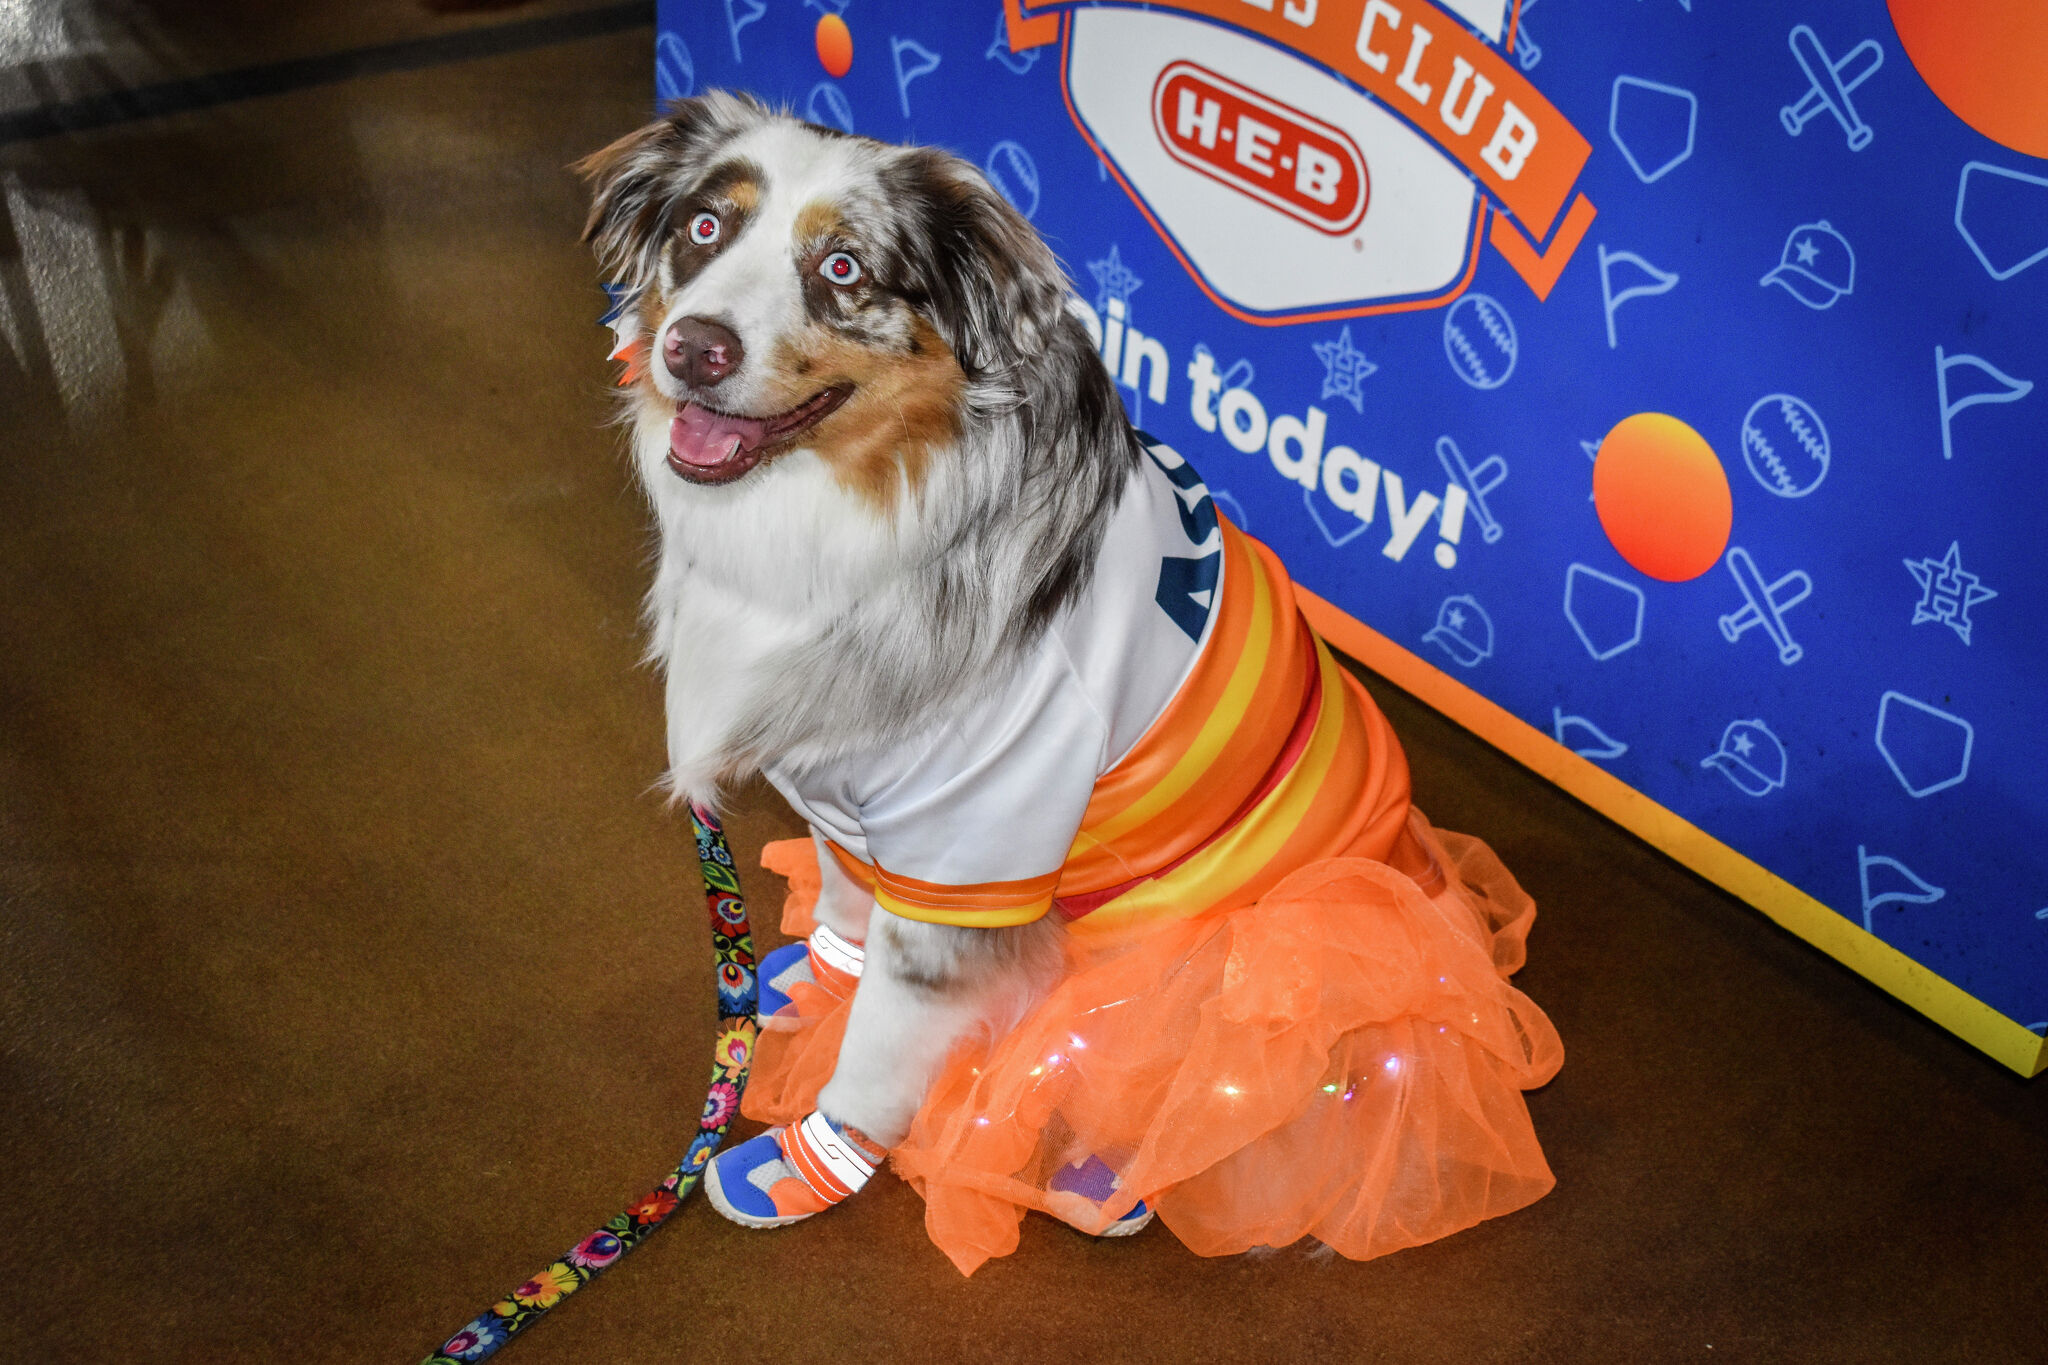 Houston Astros - We love our furry friends. It's Dog Day